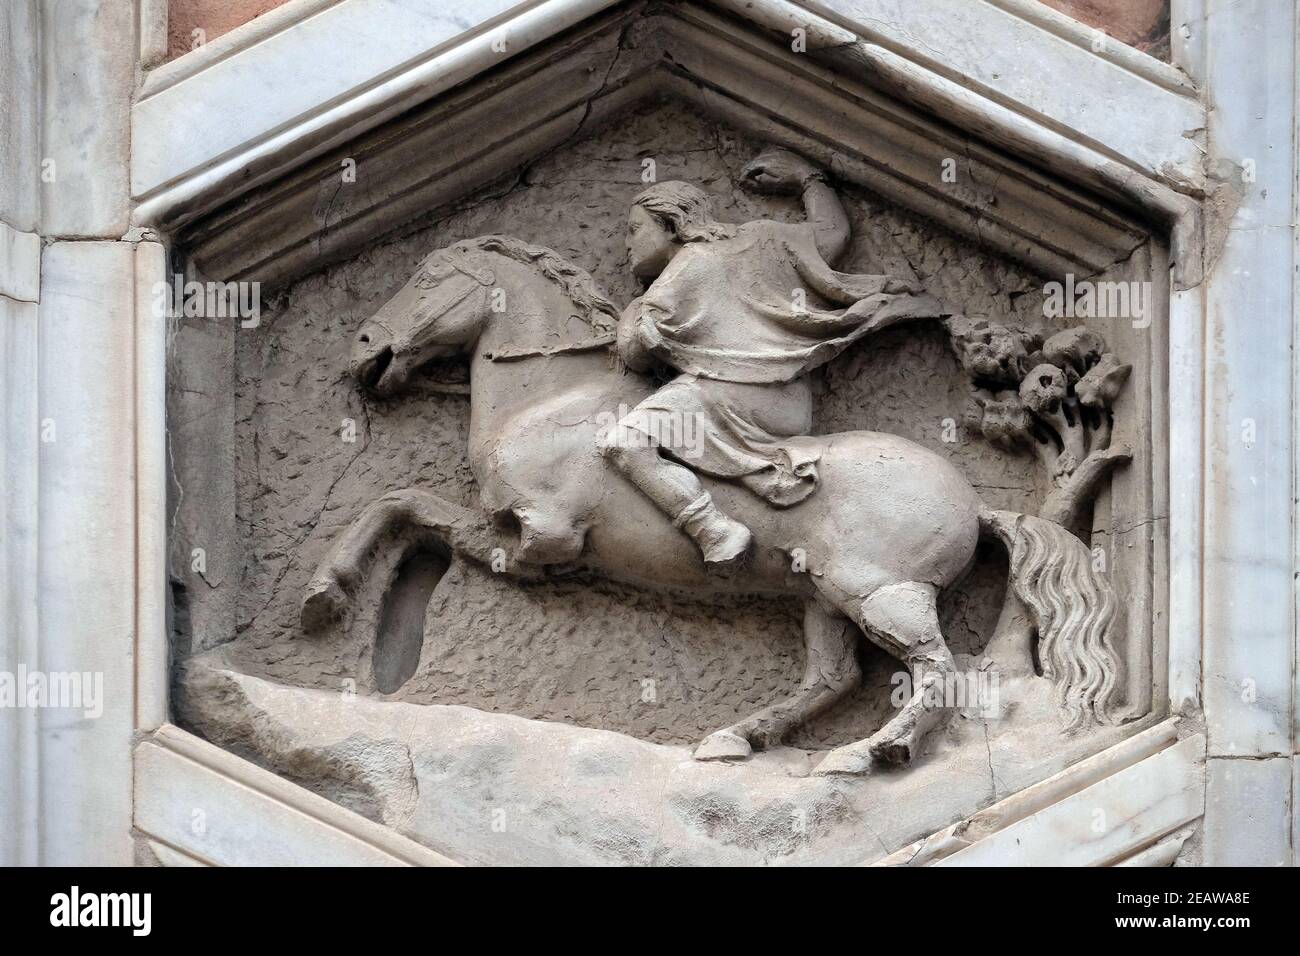 Allegory of Hunting from the workshop of Pisano, Relief on Giotto Campanile of Cattedrale di Santa Maria del Fiore (Cathedral of Saint Mary of the Flower), Florence, Italy Stock Photo